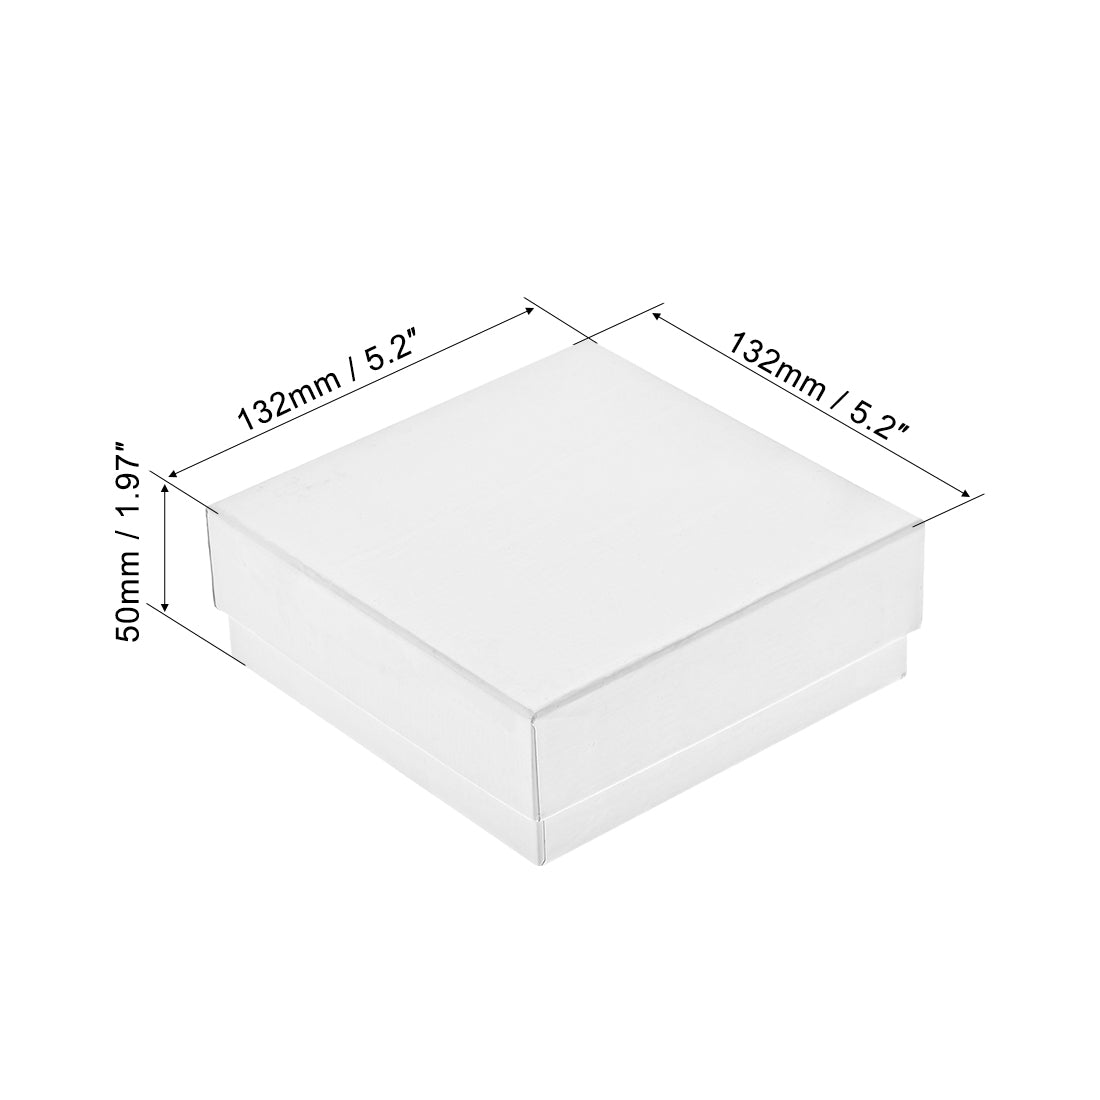 uxcell Uxcell Freezer Tube Box 81 Places Waterproof Cardboard Holder Rack for 1.5/1.8/2ml Microcentrifuge Tubes